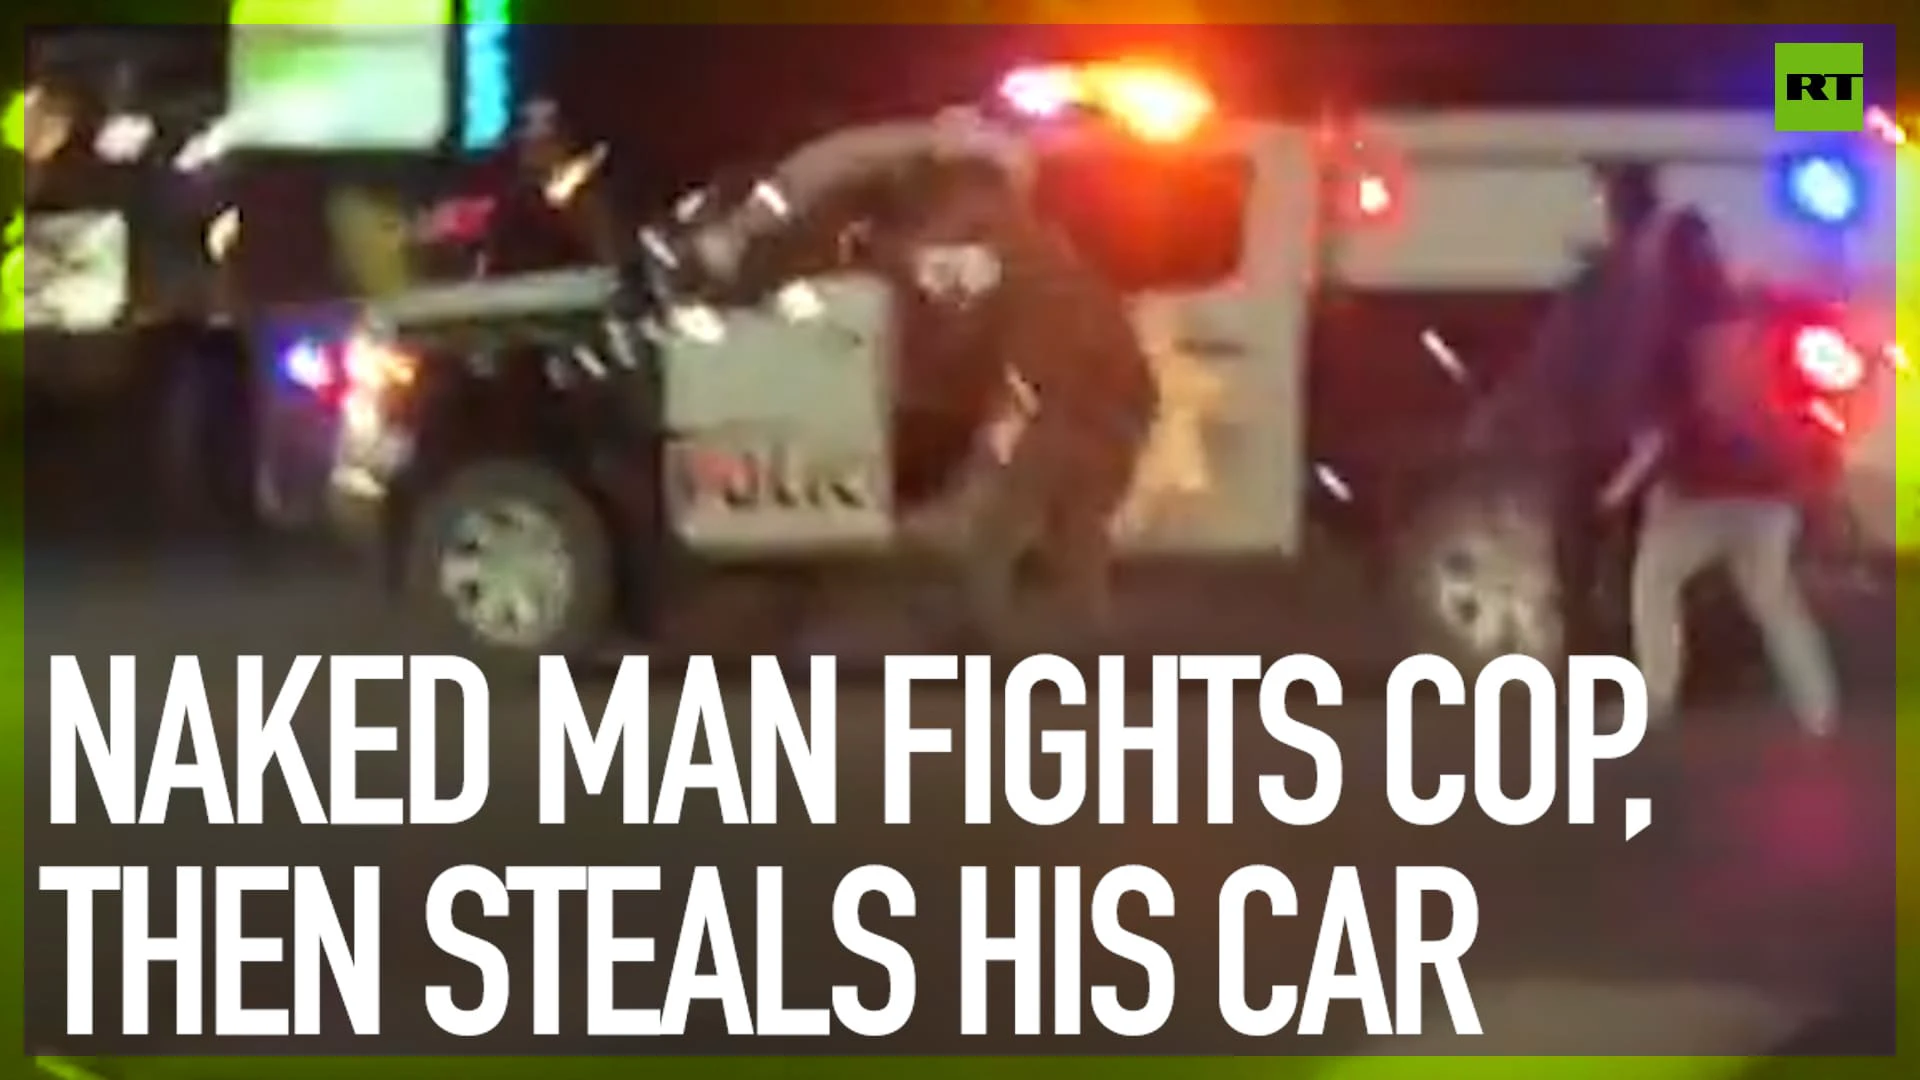 Naked man fights cop, then steals his car